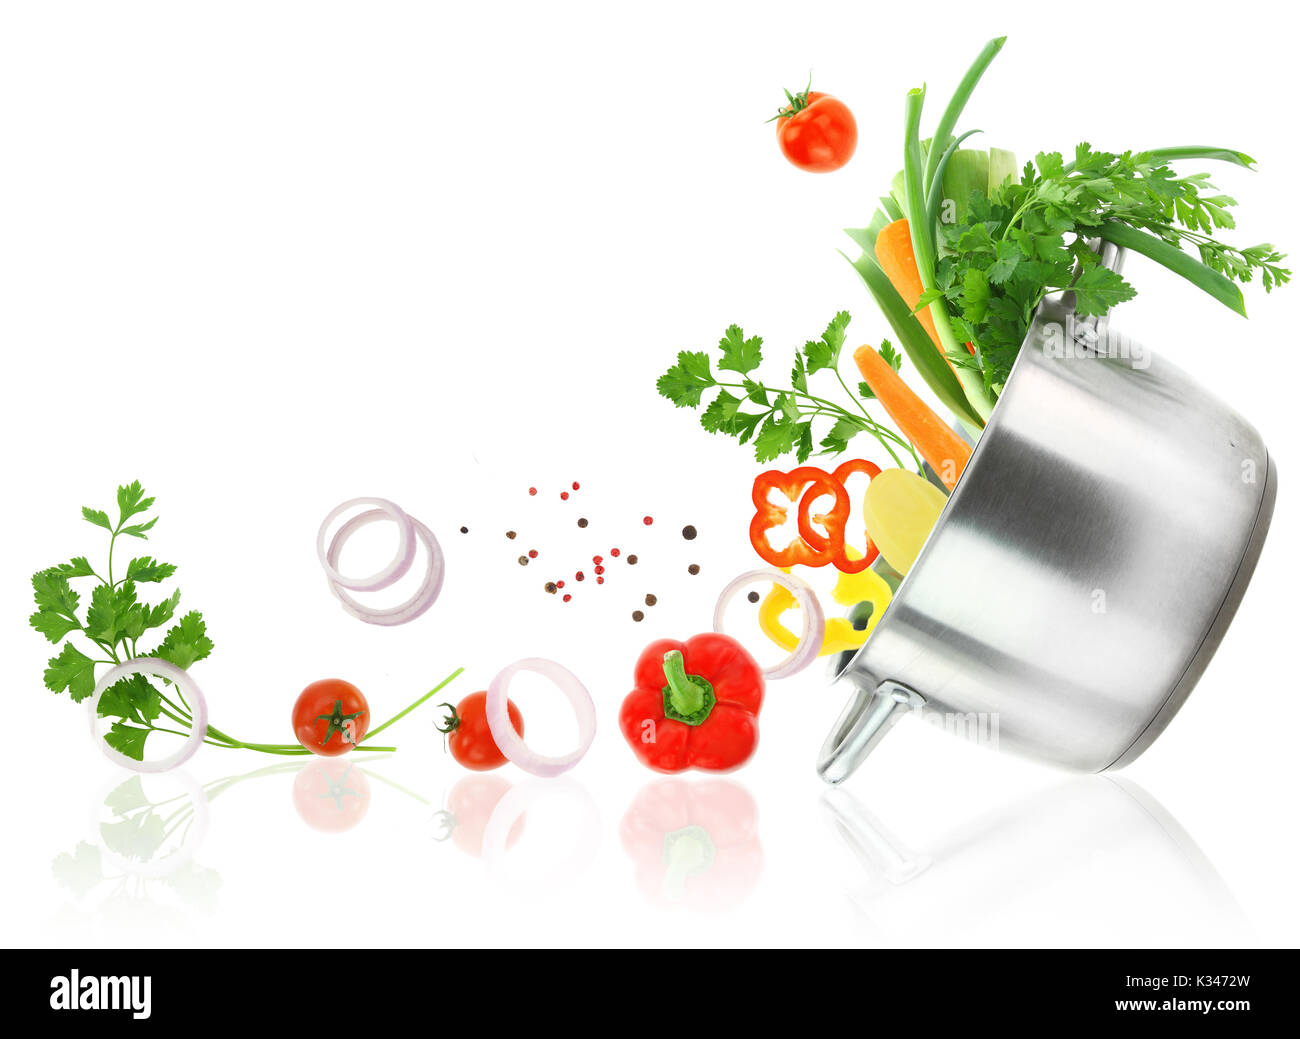 Fresh vegetables coming out from a stainless steel casserole pot Stock Photo